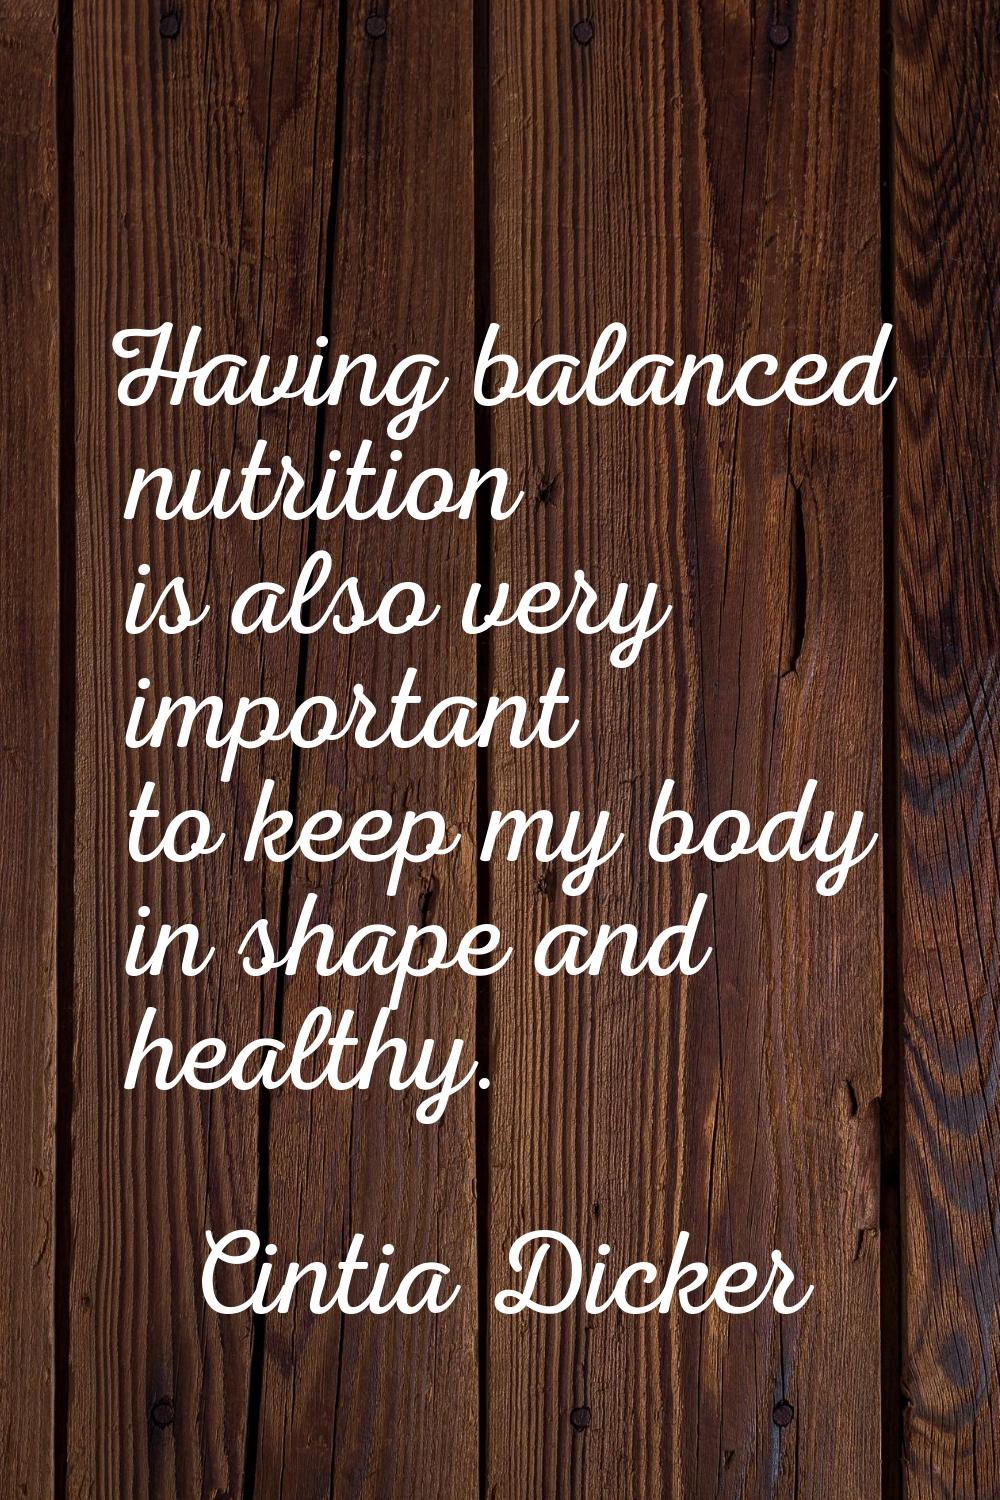 Having balanced nutrition is also very important to keep my body in shape and healthy.